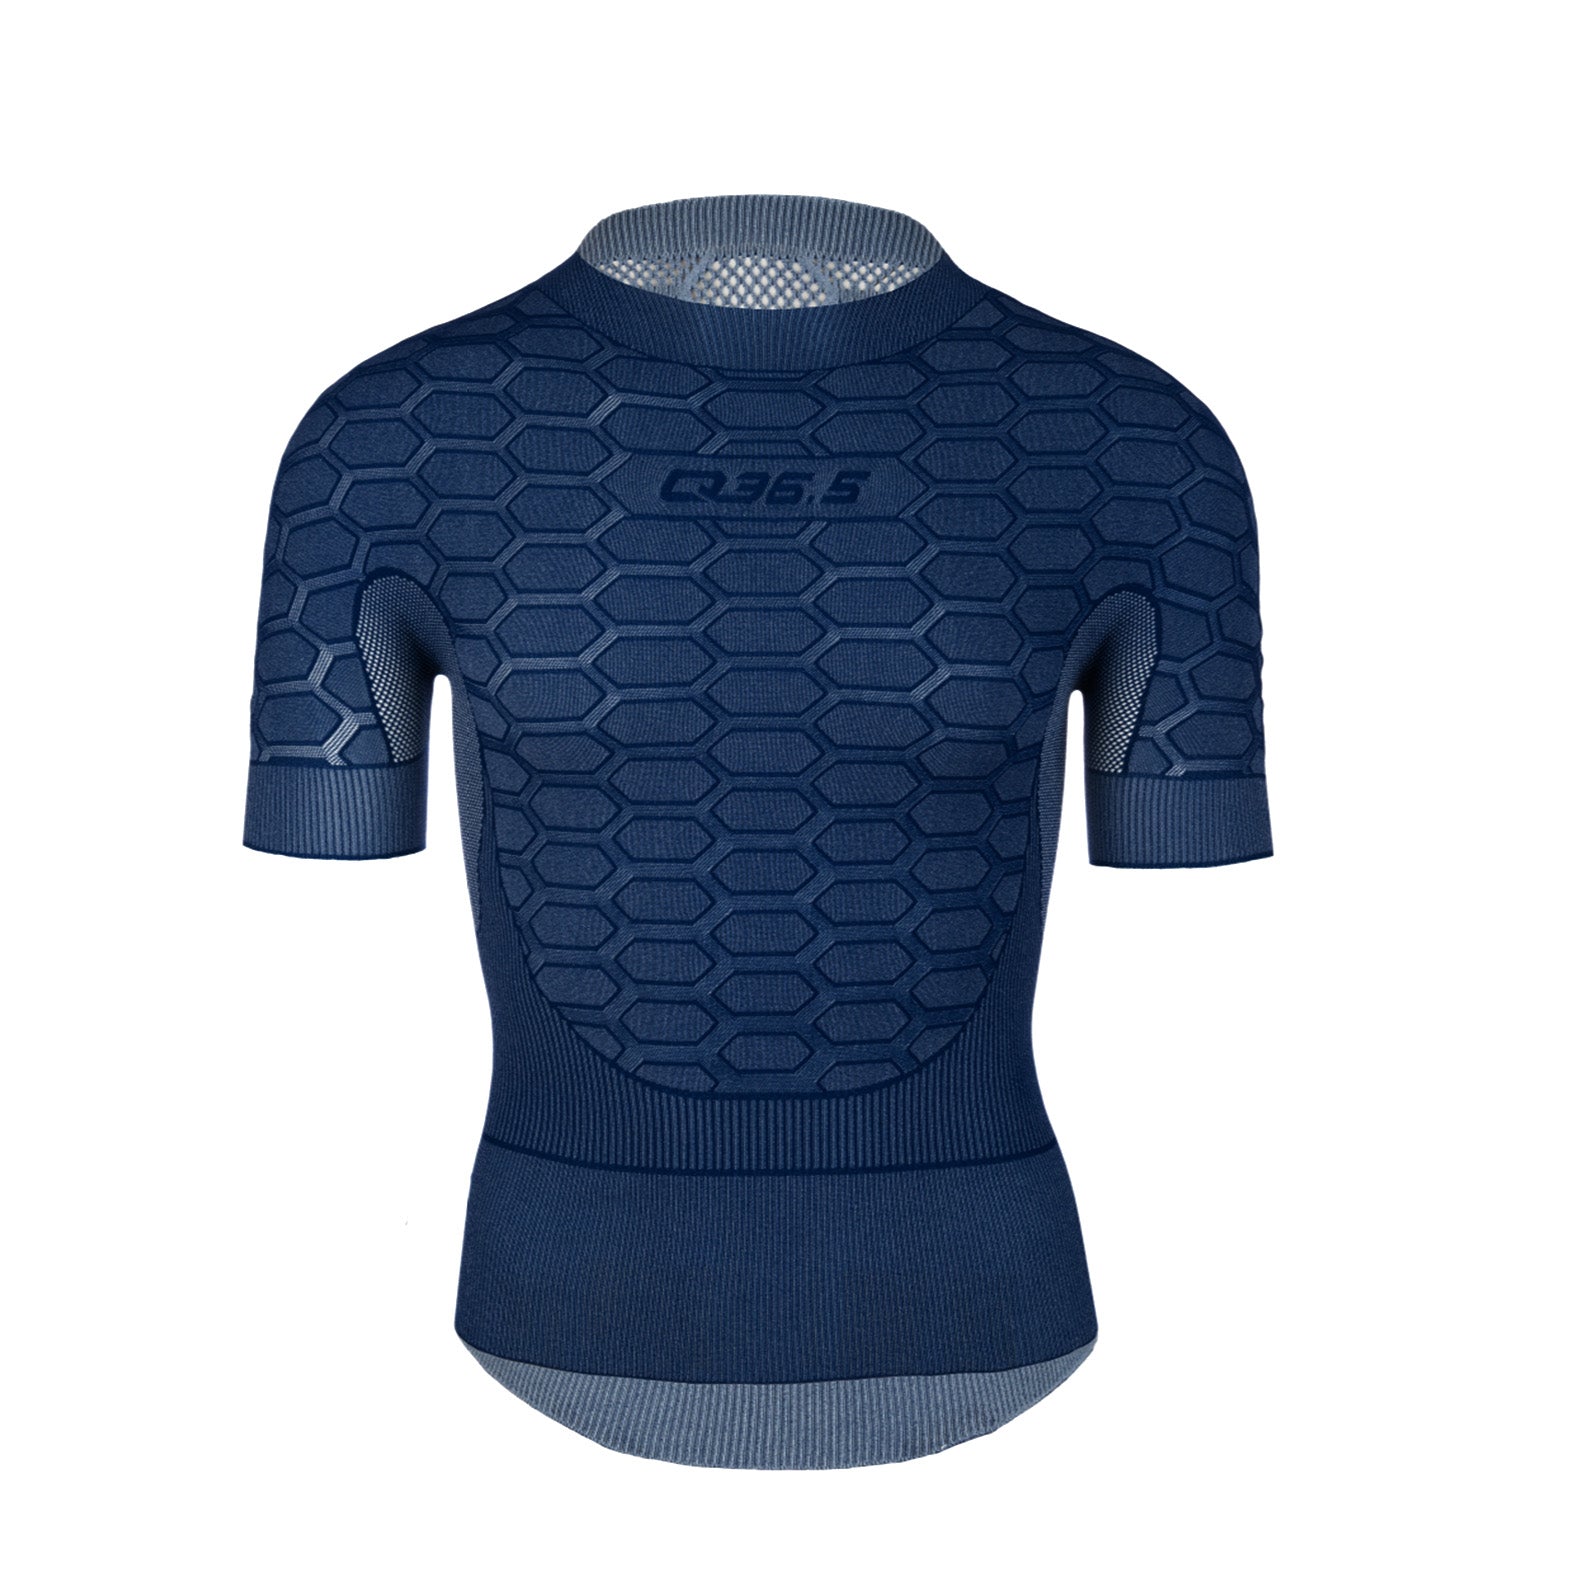 Q36.5  Base Layer 2 Short Sleeve in Navy